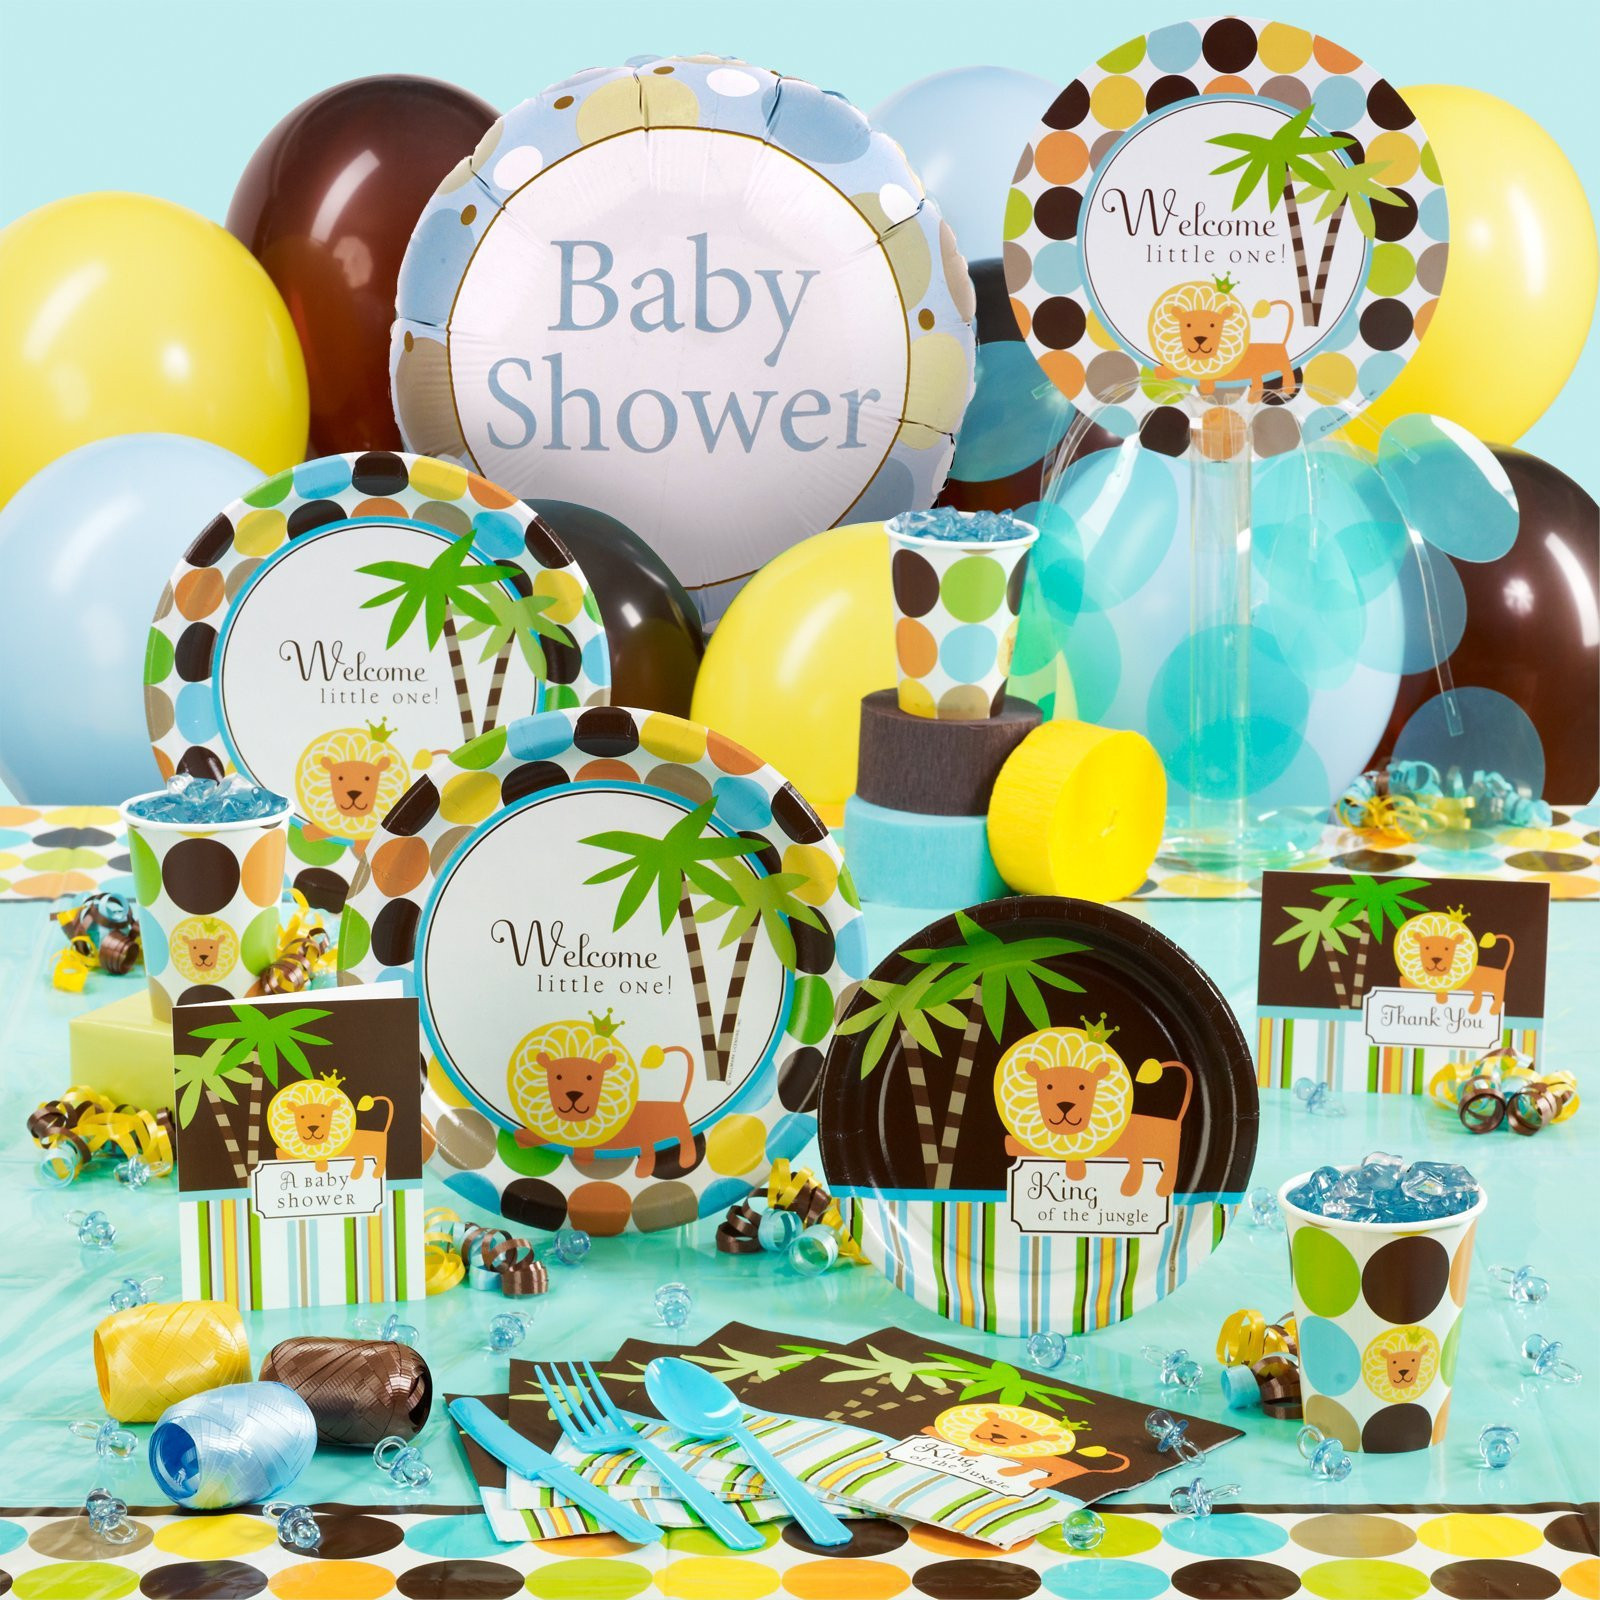 Party City Safari Theme Baby Shower
 Party City Jungle Safari Baby Shower • Baby Showers Ideas